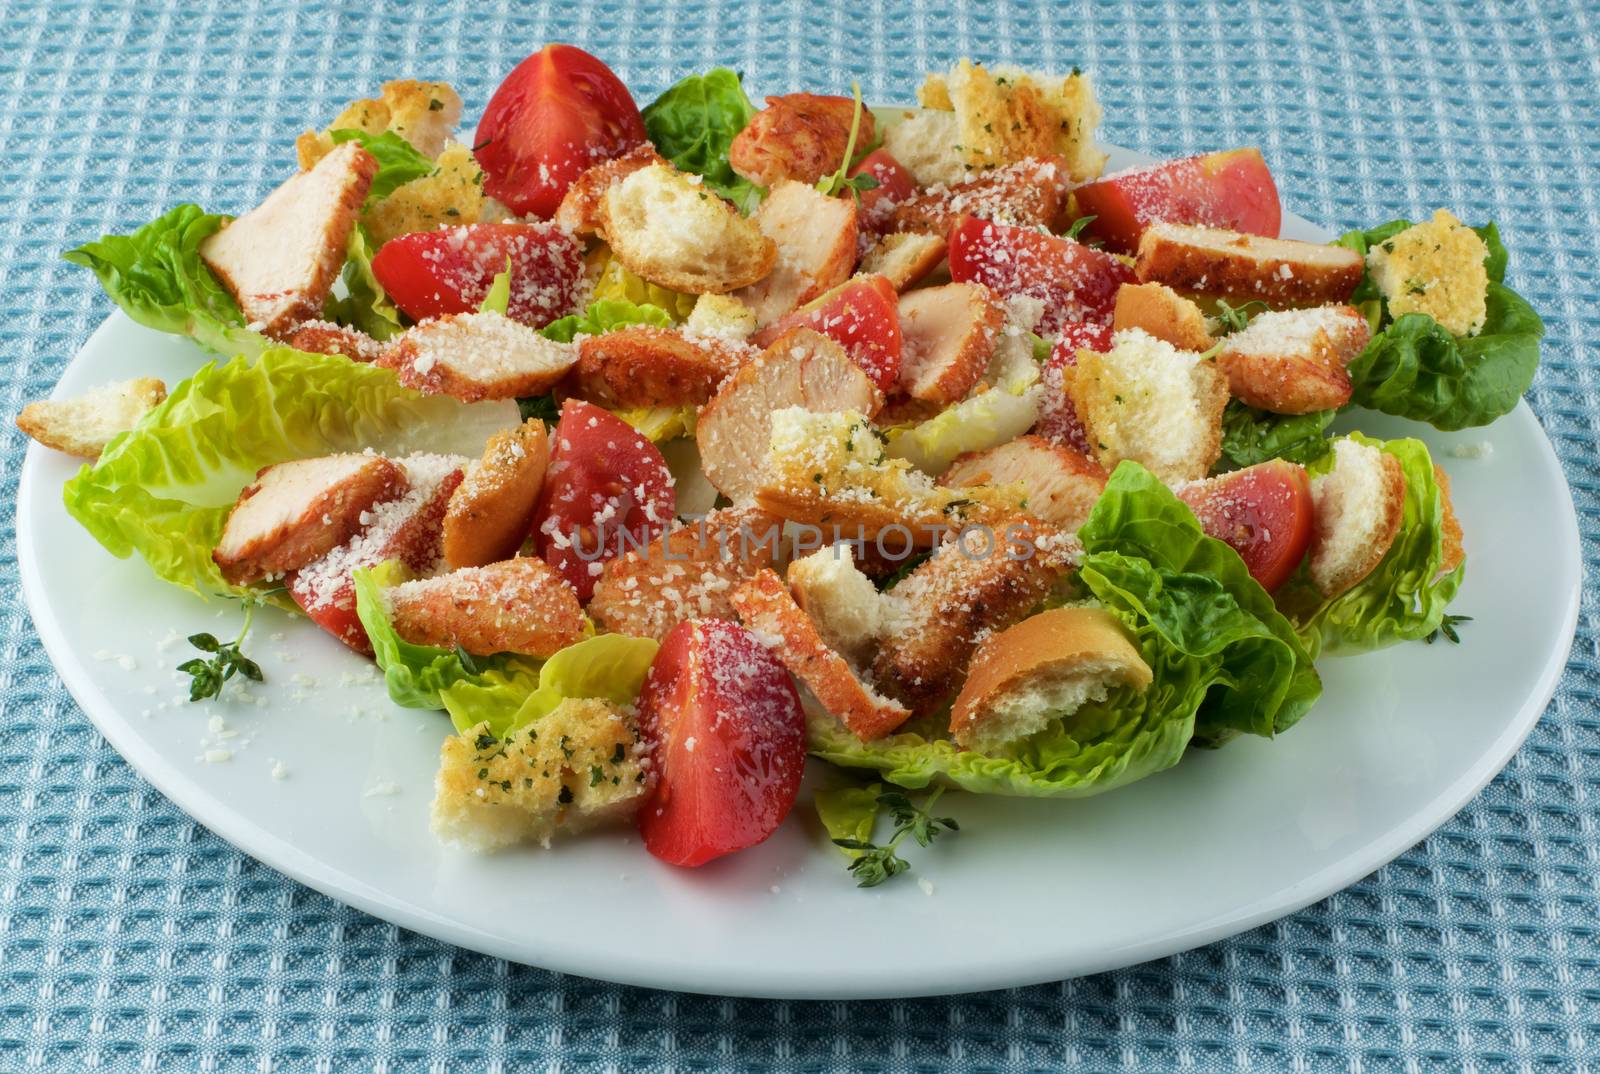 Delicious Caesar Salad with Roasted Chicken Breast, Garlic Crouton, Romaine Lettuce, Cherry Tomatoes and Grated Parmesan Cheese closeup on White Plate on Blue Napkin